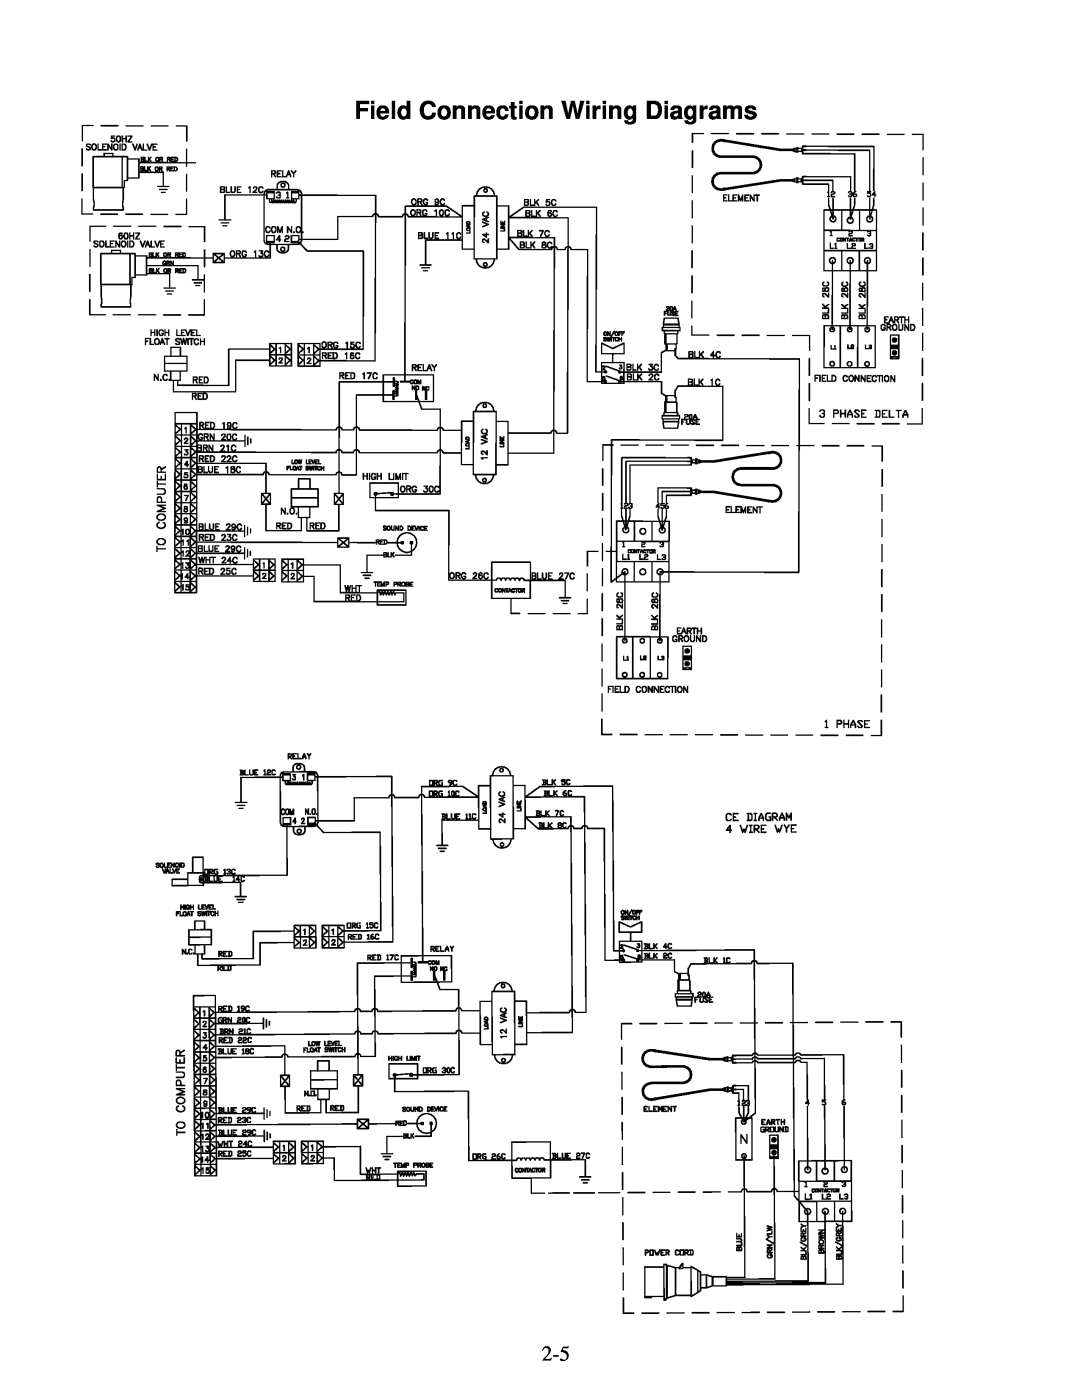 Frymaster FE155 operation manual Field Connection Wiring Diagrams 